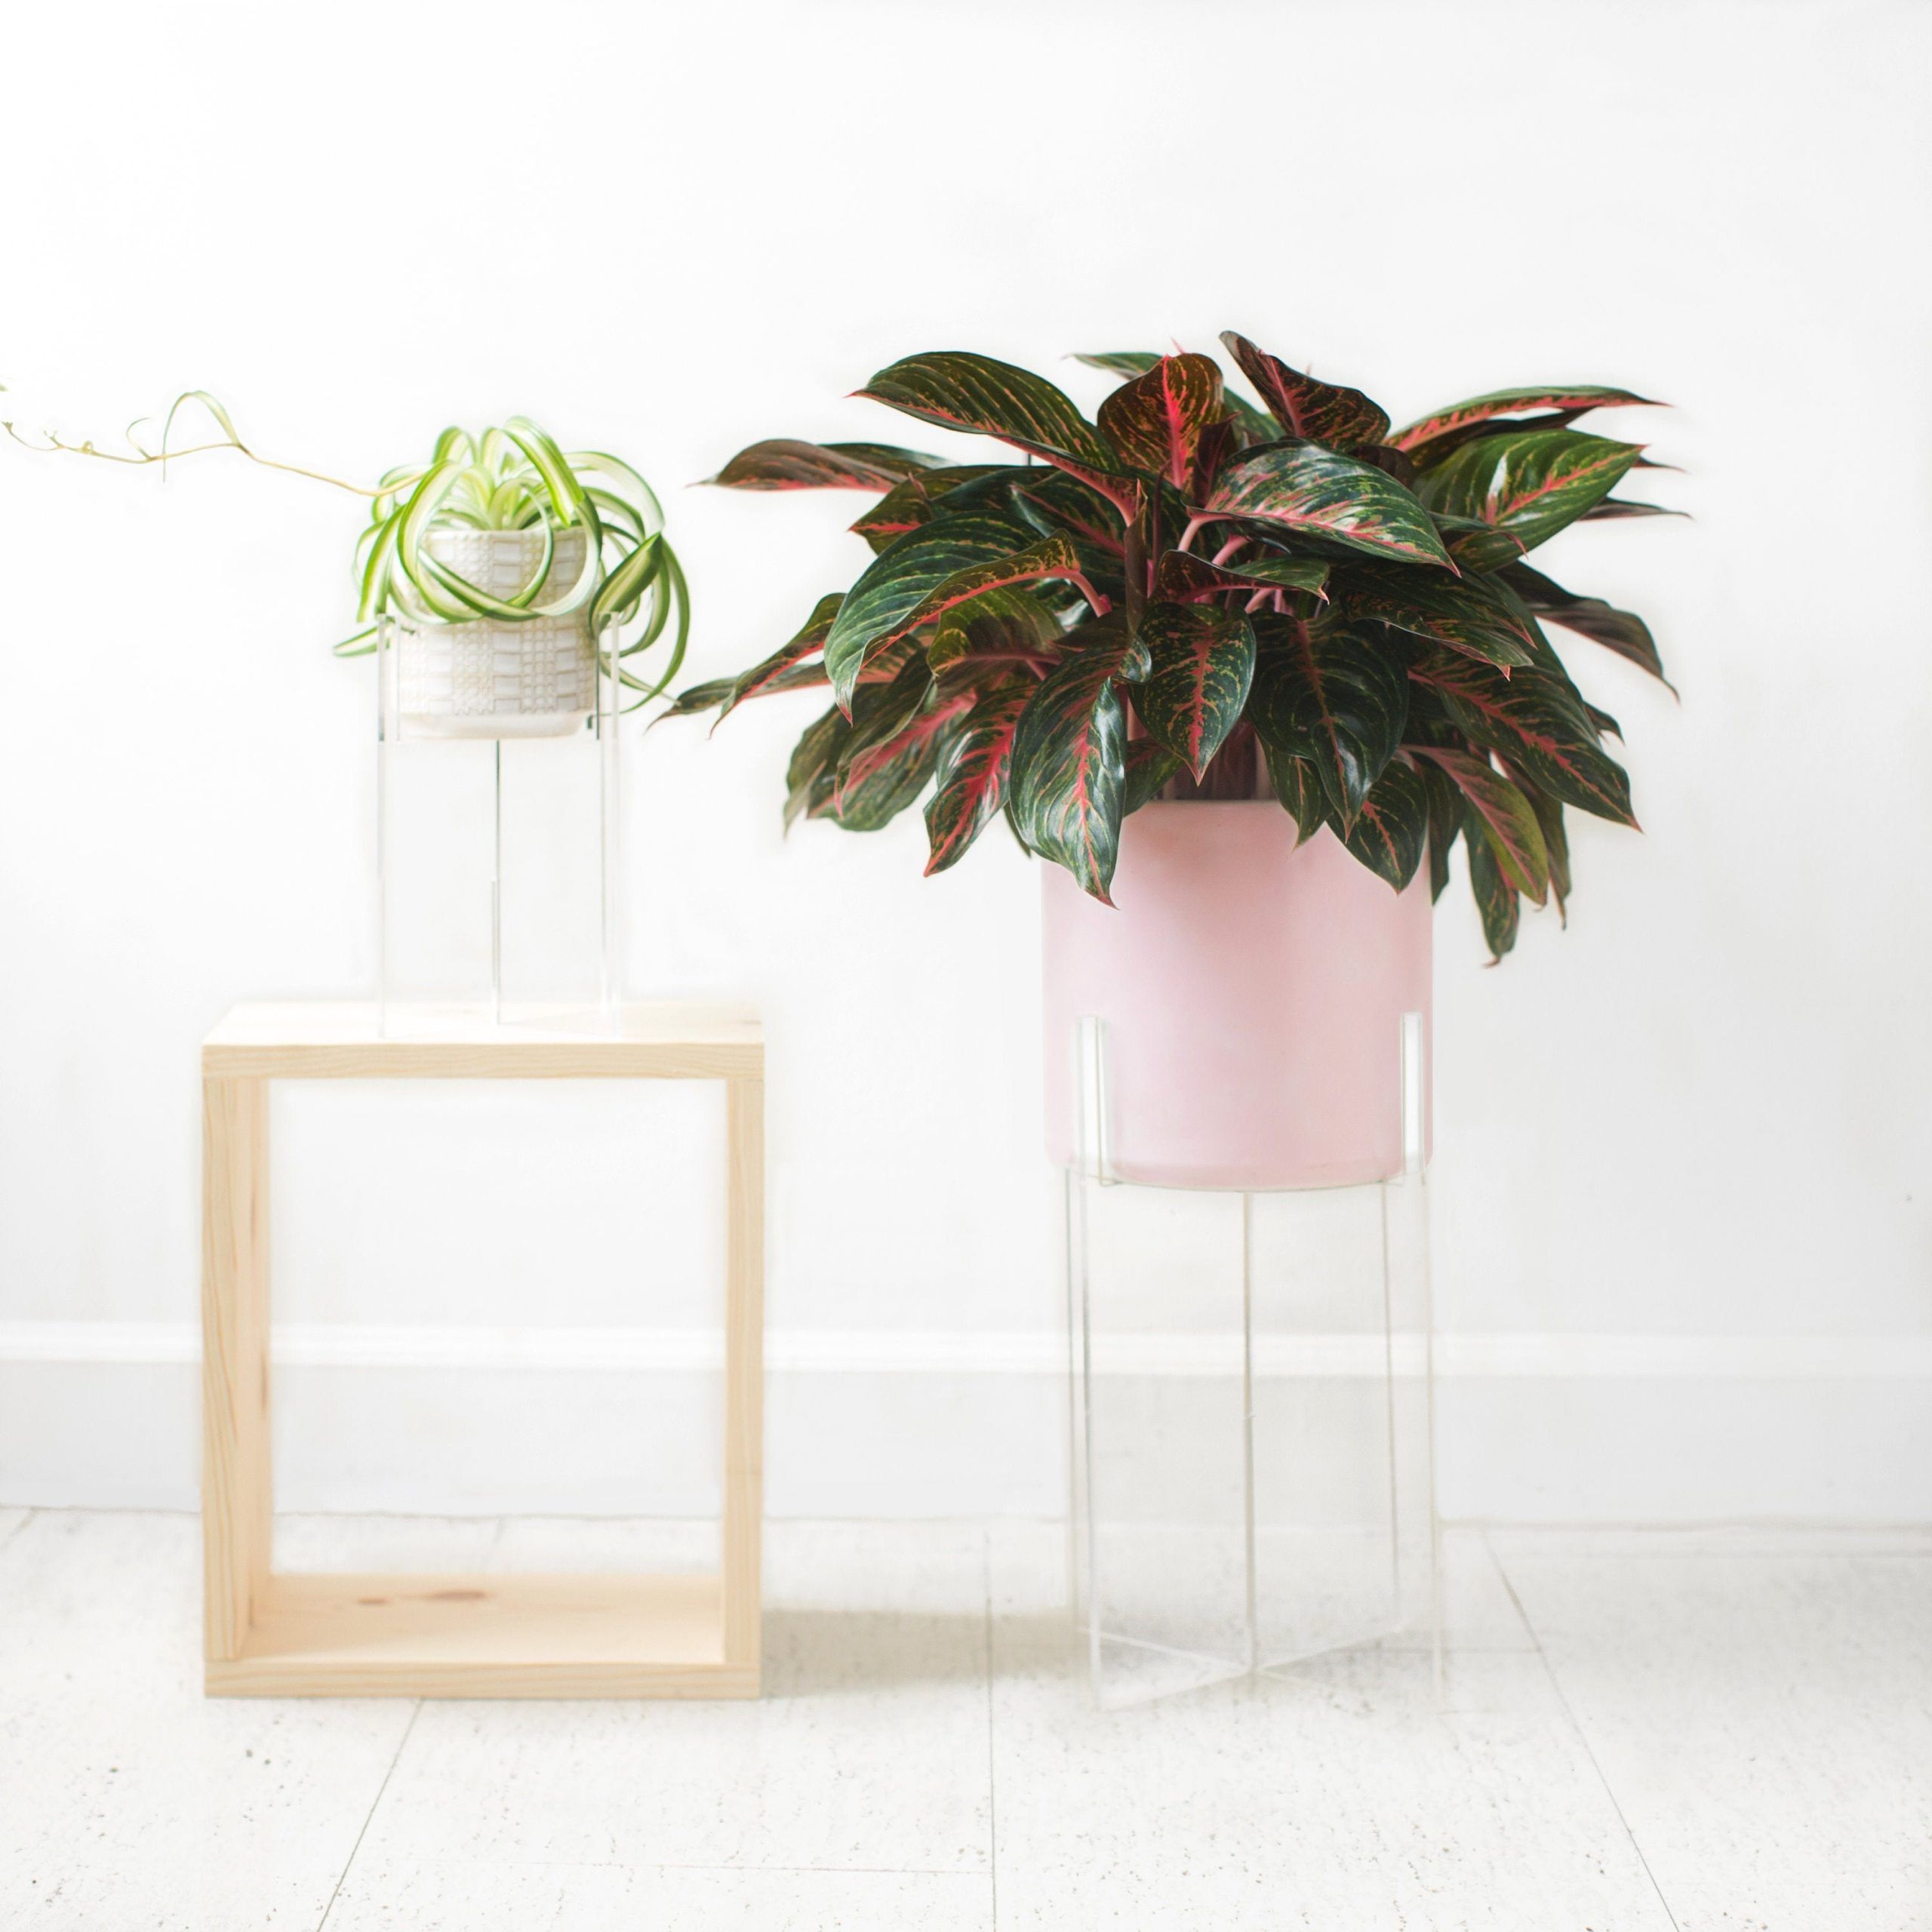 Trendy Acrylic Plant Stands Regarding Plexiglass Clear Plant Stand Acrylic Floating Indoor Plant – Etsy (View 4 of 10)